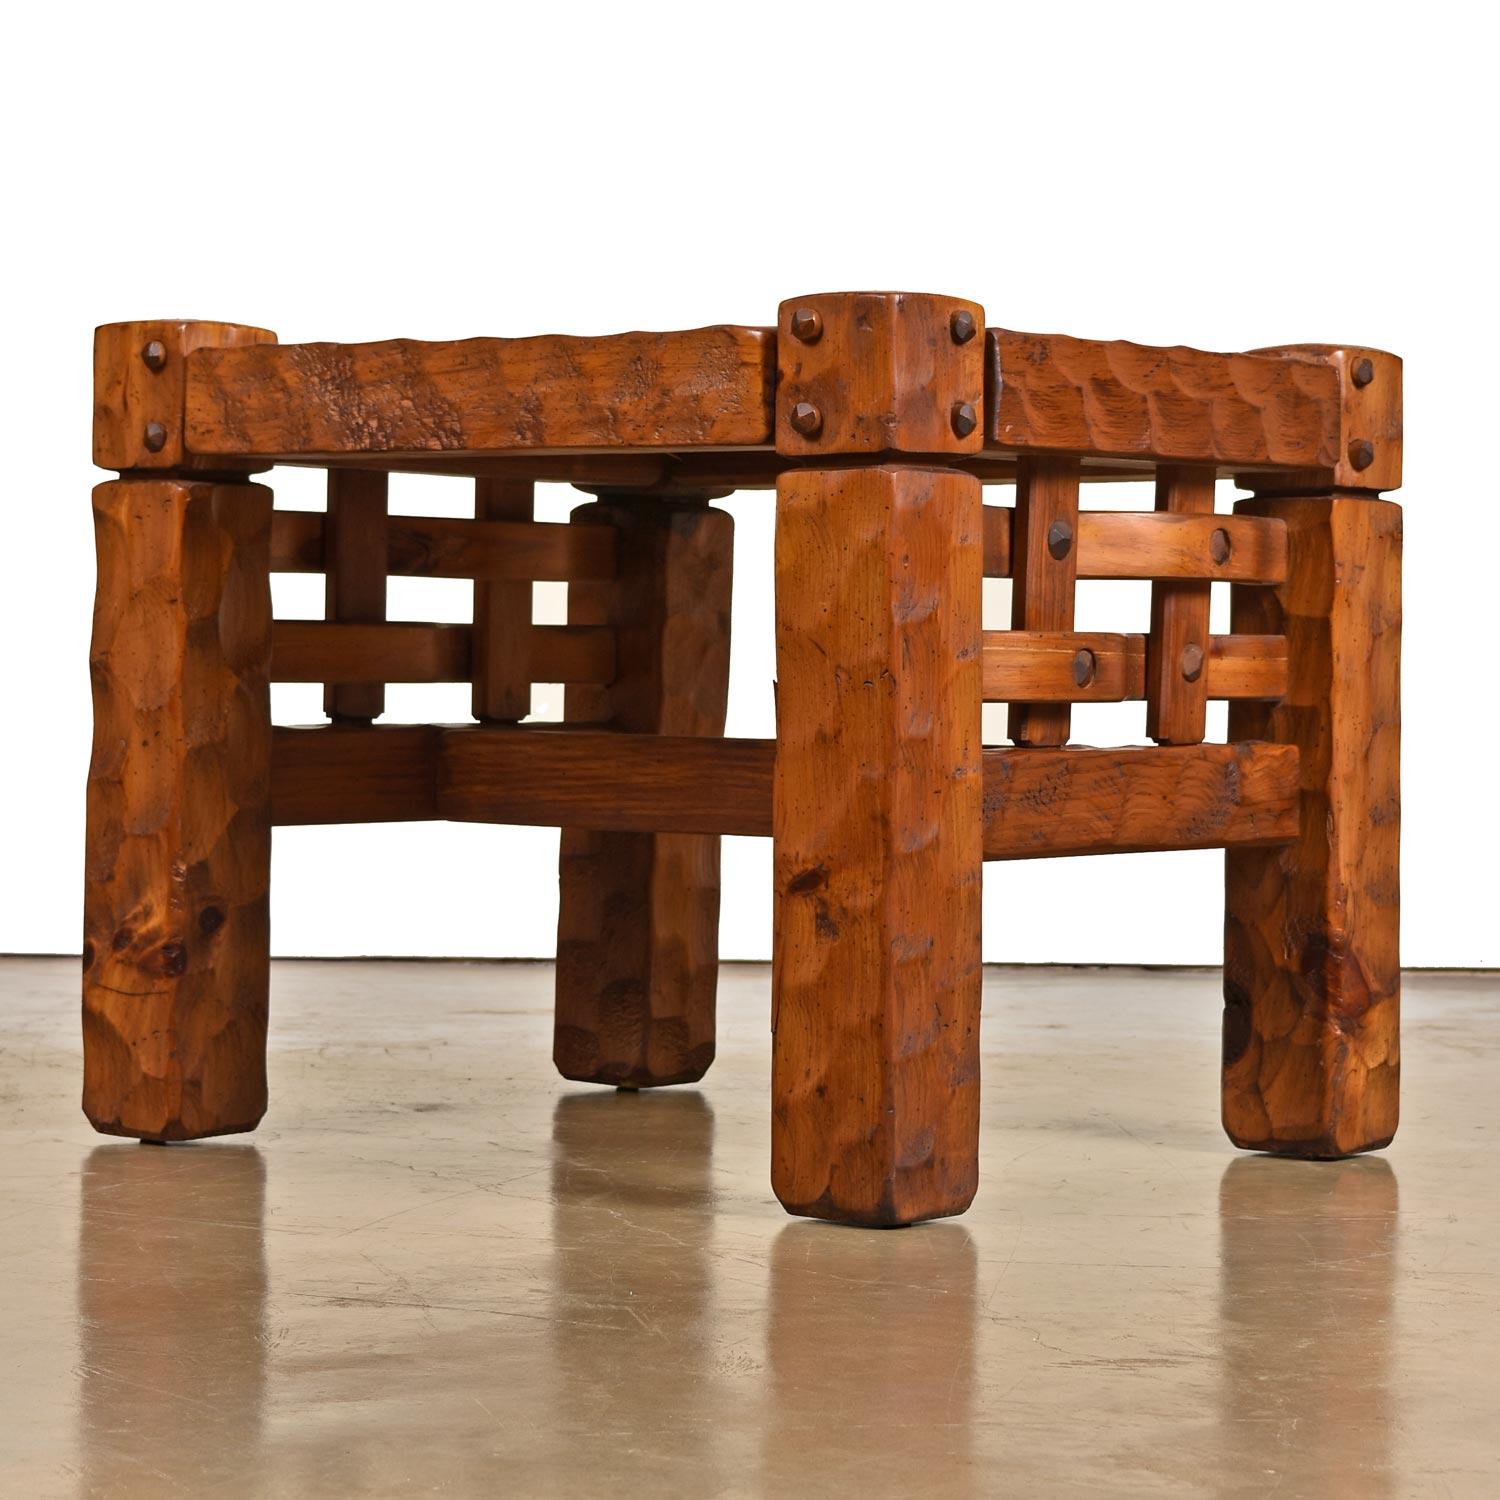 Rustic modern is the best way we can describe this truly unique end table. You don't need a ski lodge or Hemingway-esque cabin to integrate this into your decor. Made by Null Manufacturing of Maiden N.C., this solid pine end table has the appearance